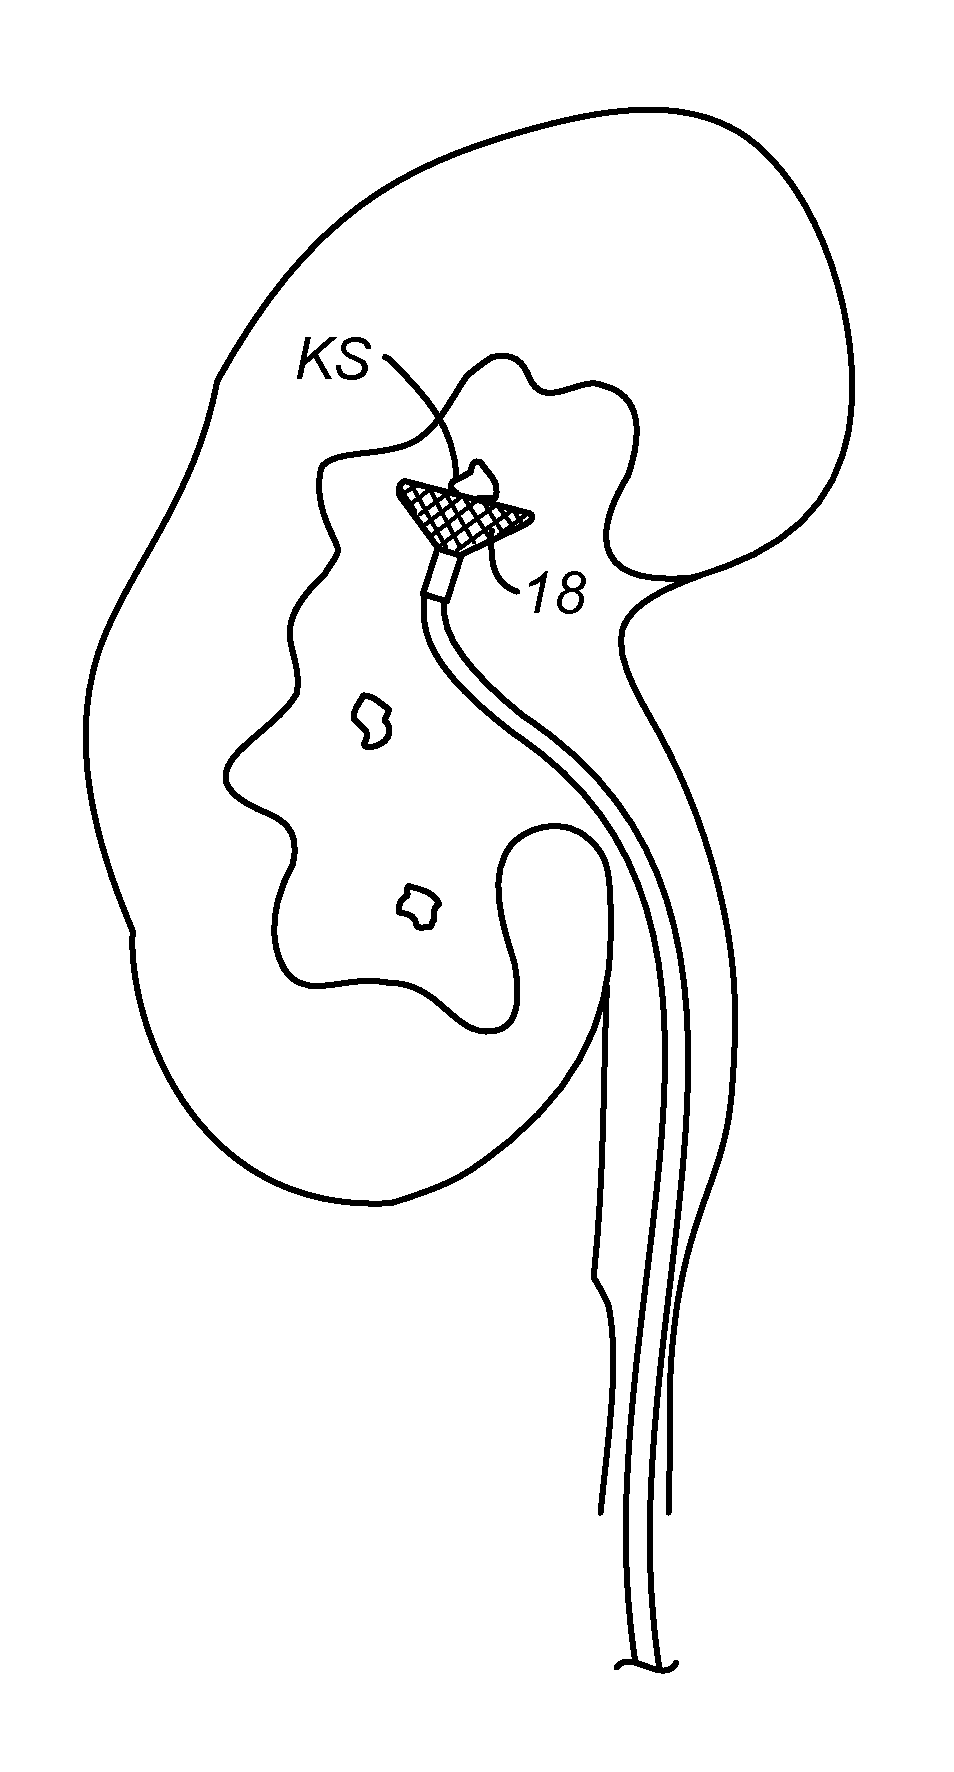 Methods and systems for capturing and removing urinary stones from body cavities